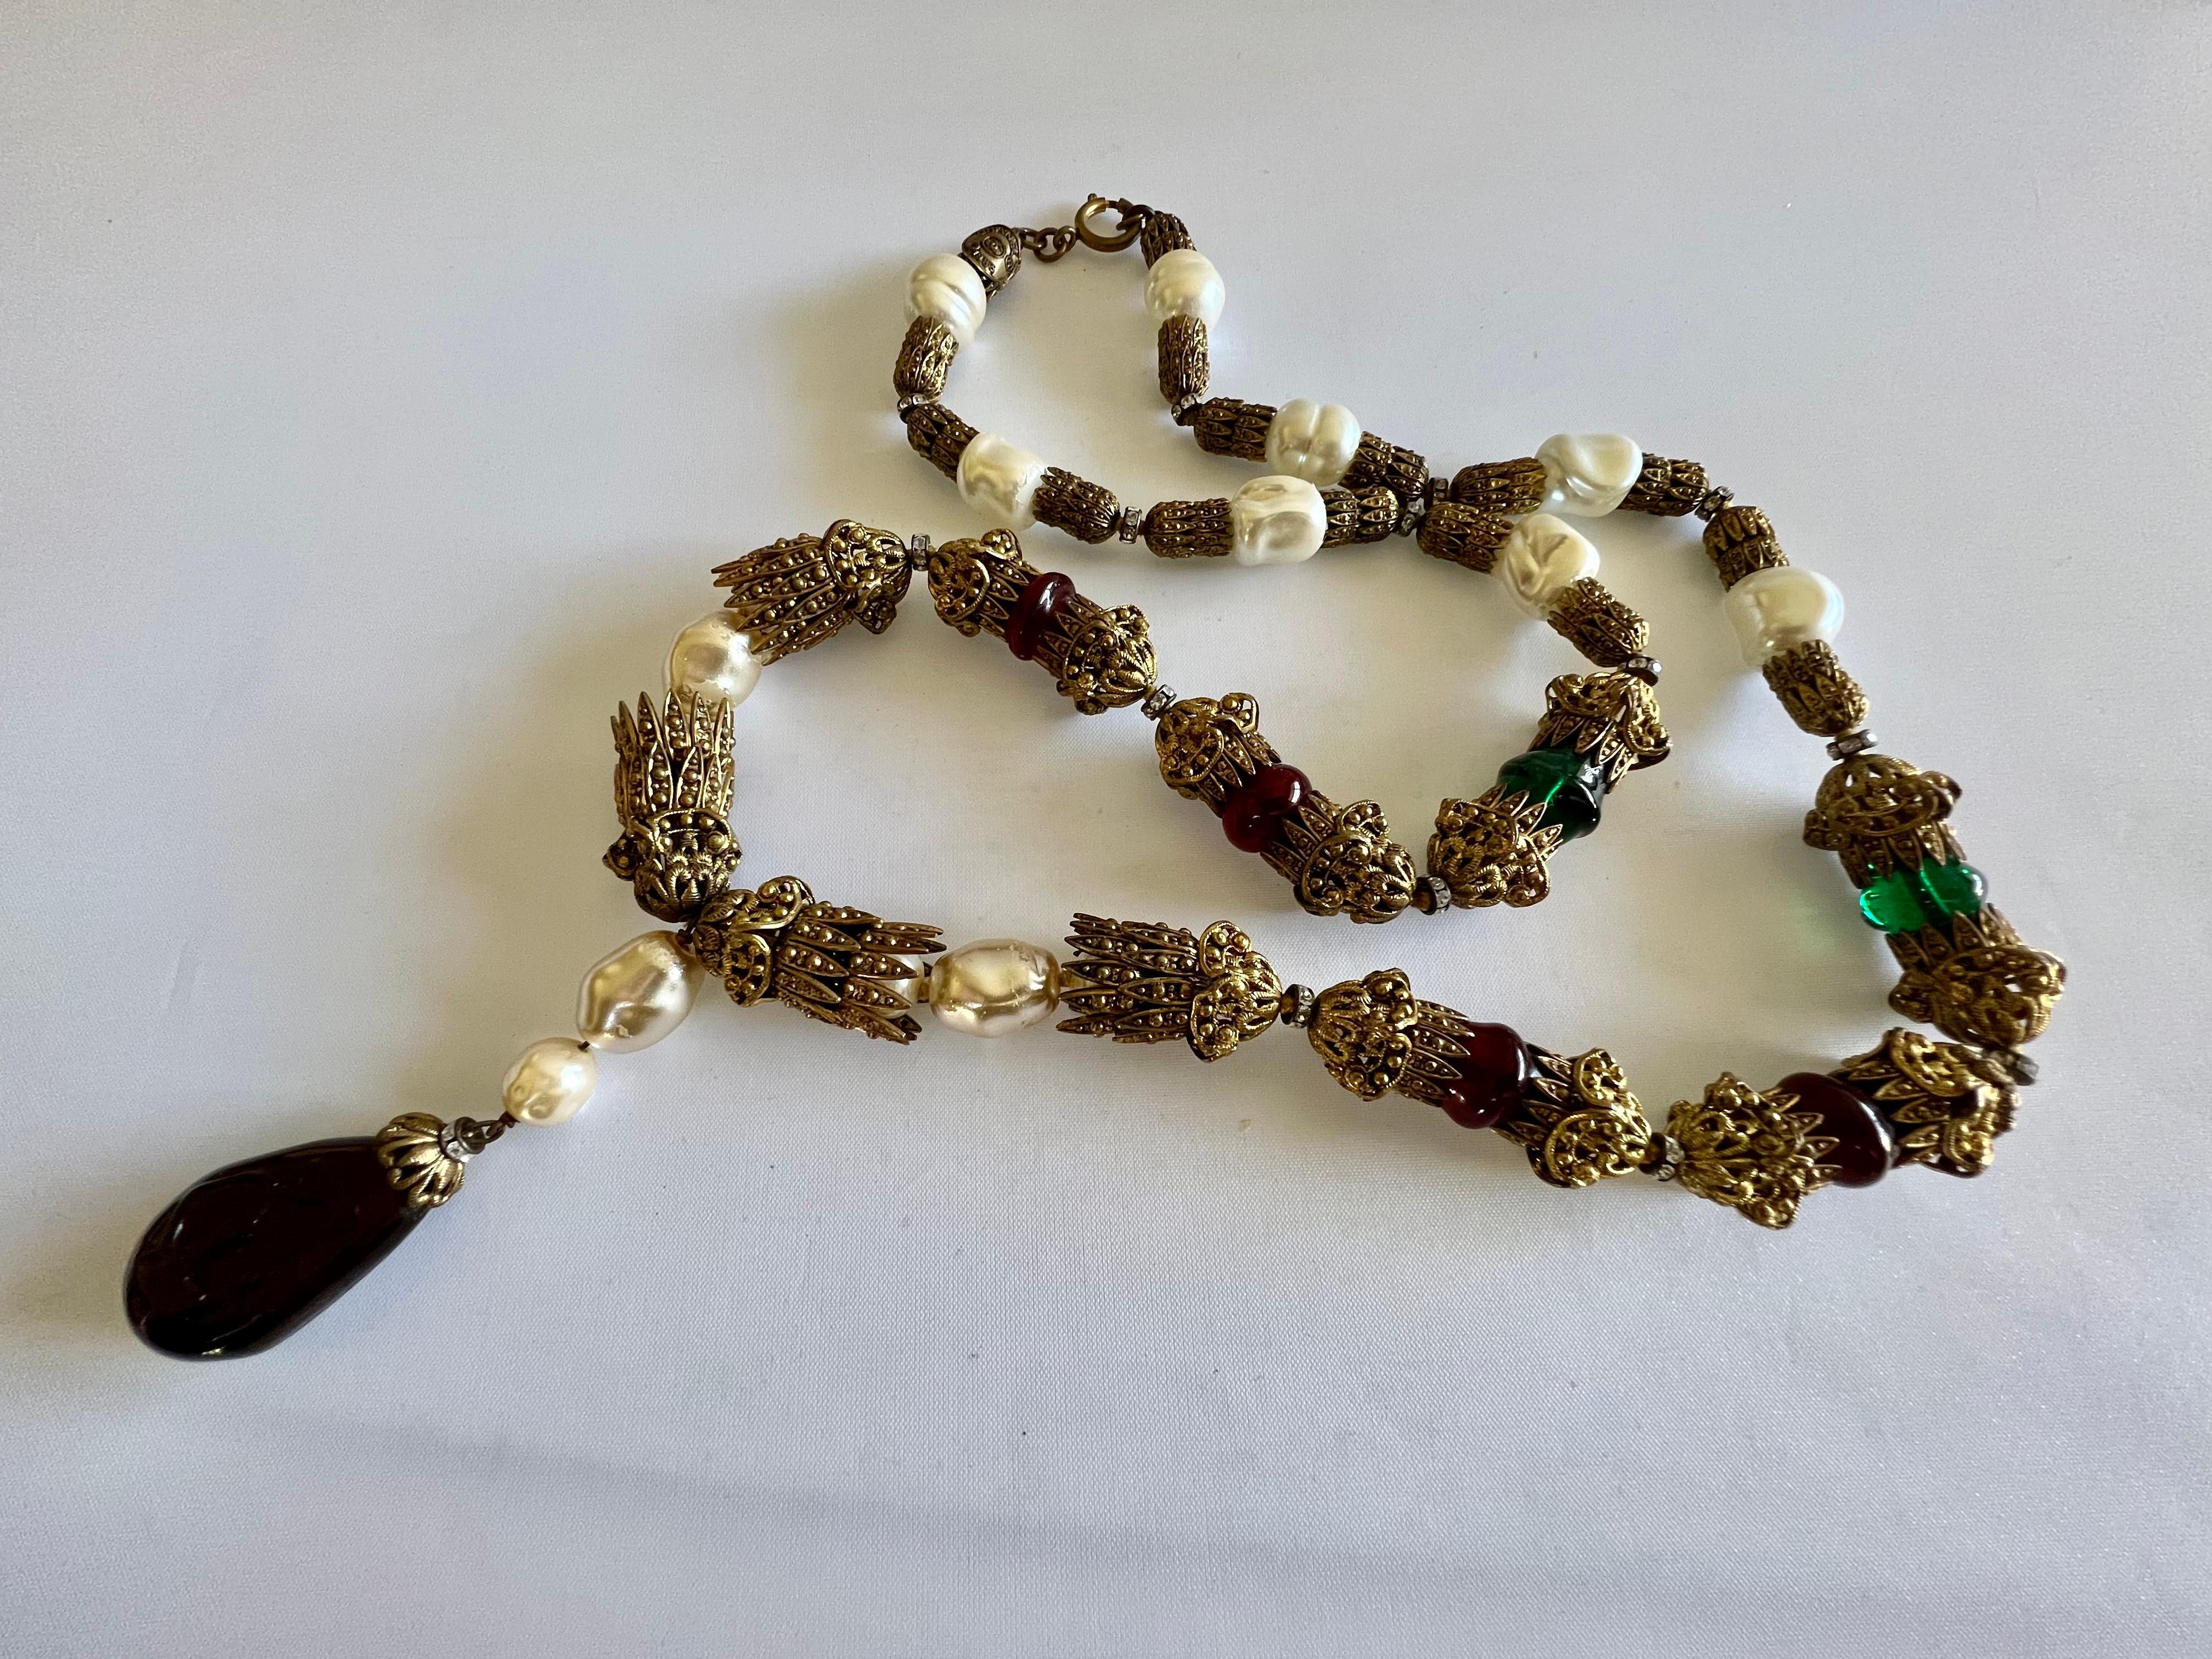 Bead Vtg Chanel Ornate Renaissance Pearl and Simulated Gemstone Statement Necklace  For Sale